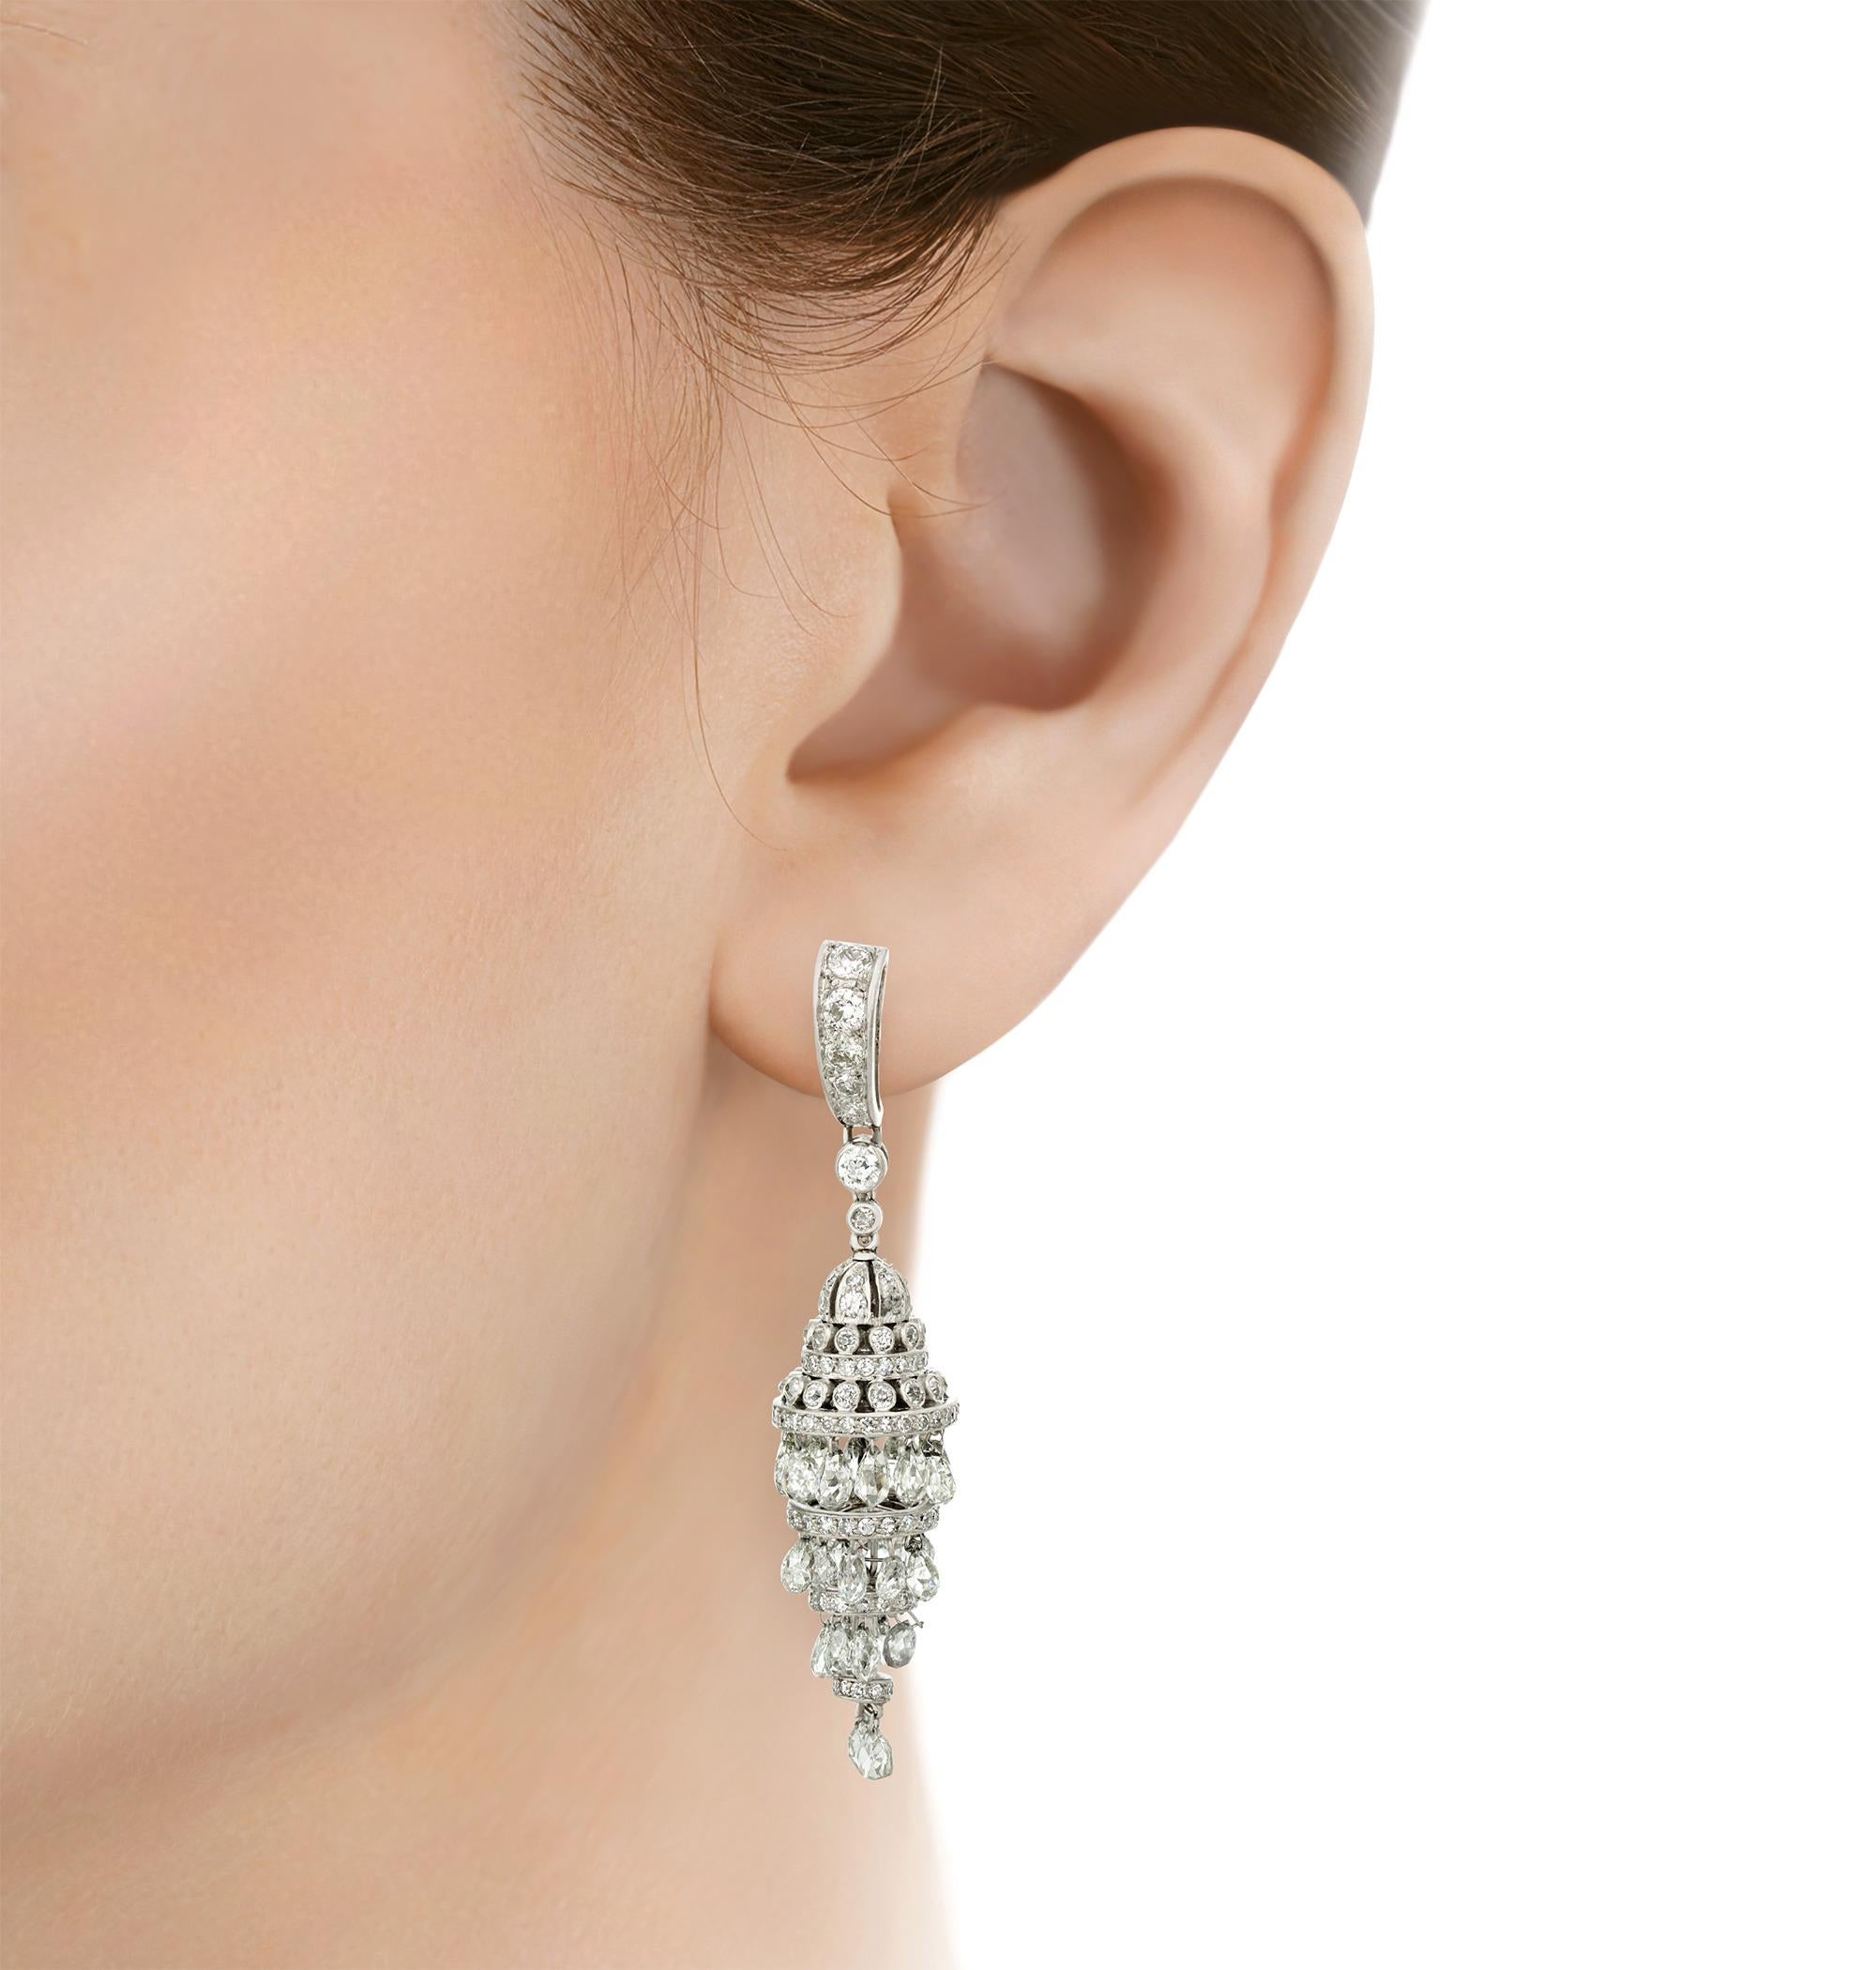 Both elegant and architectural in design, these chandelier earrings offer bountiful brilliance. Approximately 10.00 carats of cascading white diamonds form the creations. The shine of the diamonds is perfectly matched by their 14K white gold